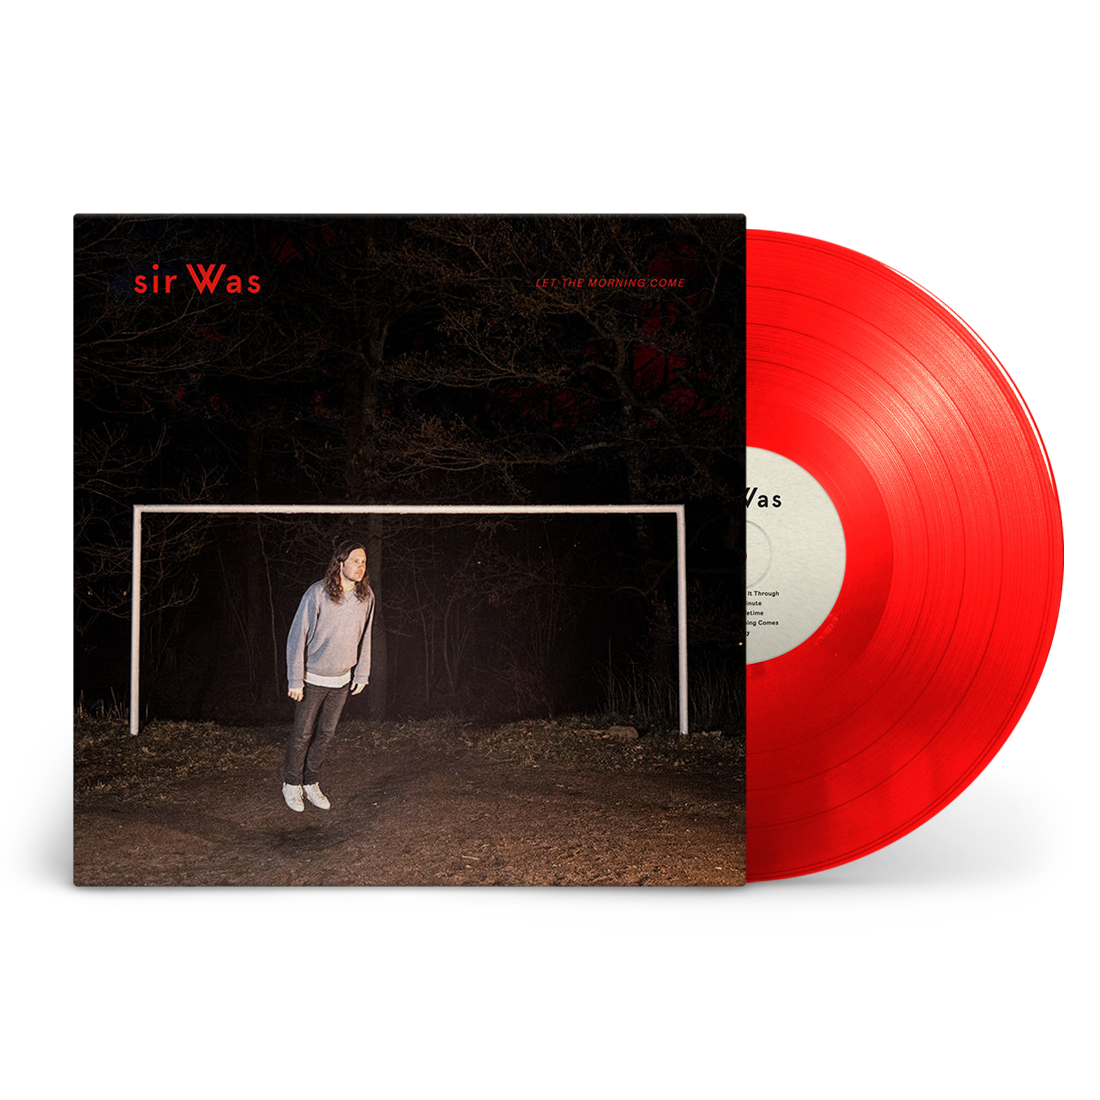 Let The Morning Come: Signed Exclusive Red Vinyl LP